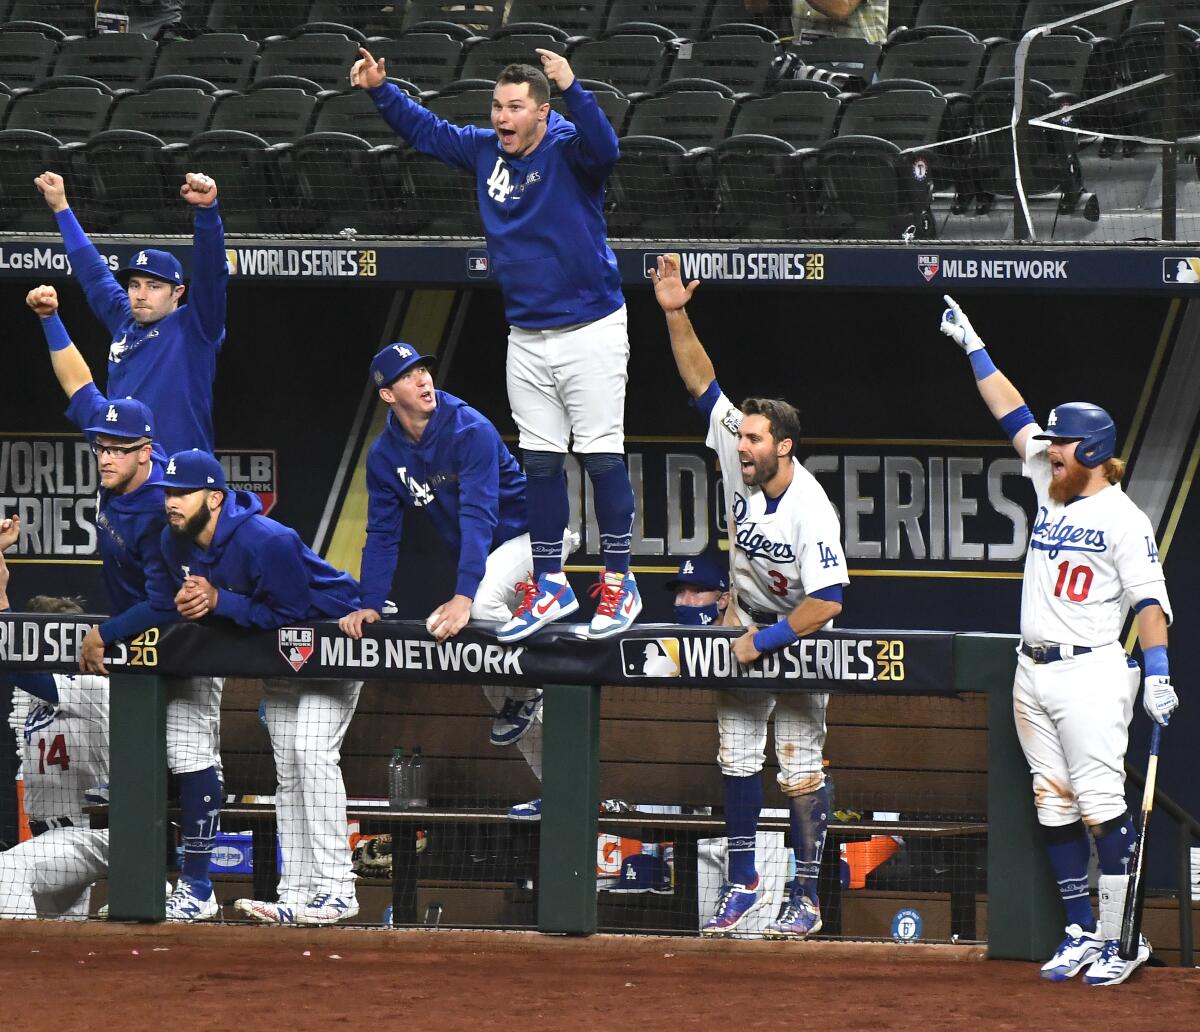 The Dodgers dugout erupts on a home run by Mookie Betts in the sixth inning against the Rays in Game 1.